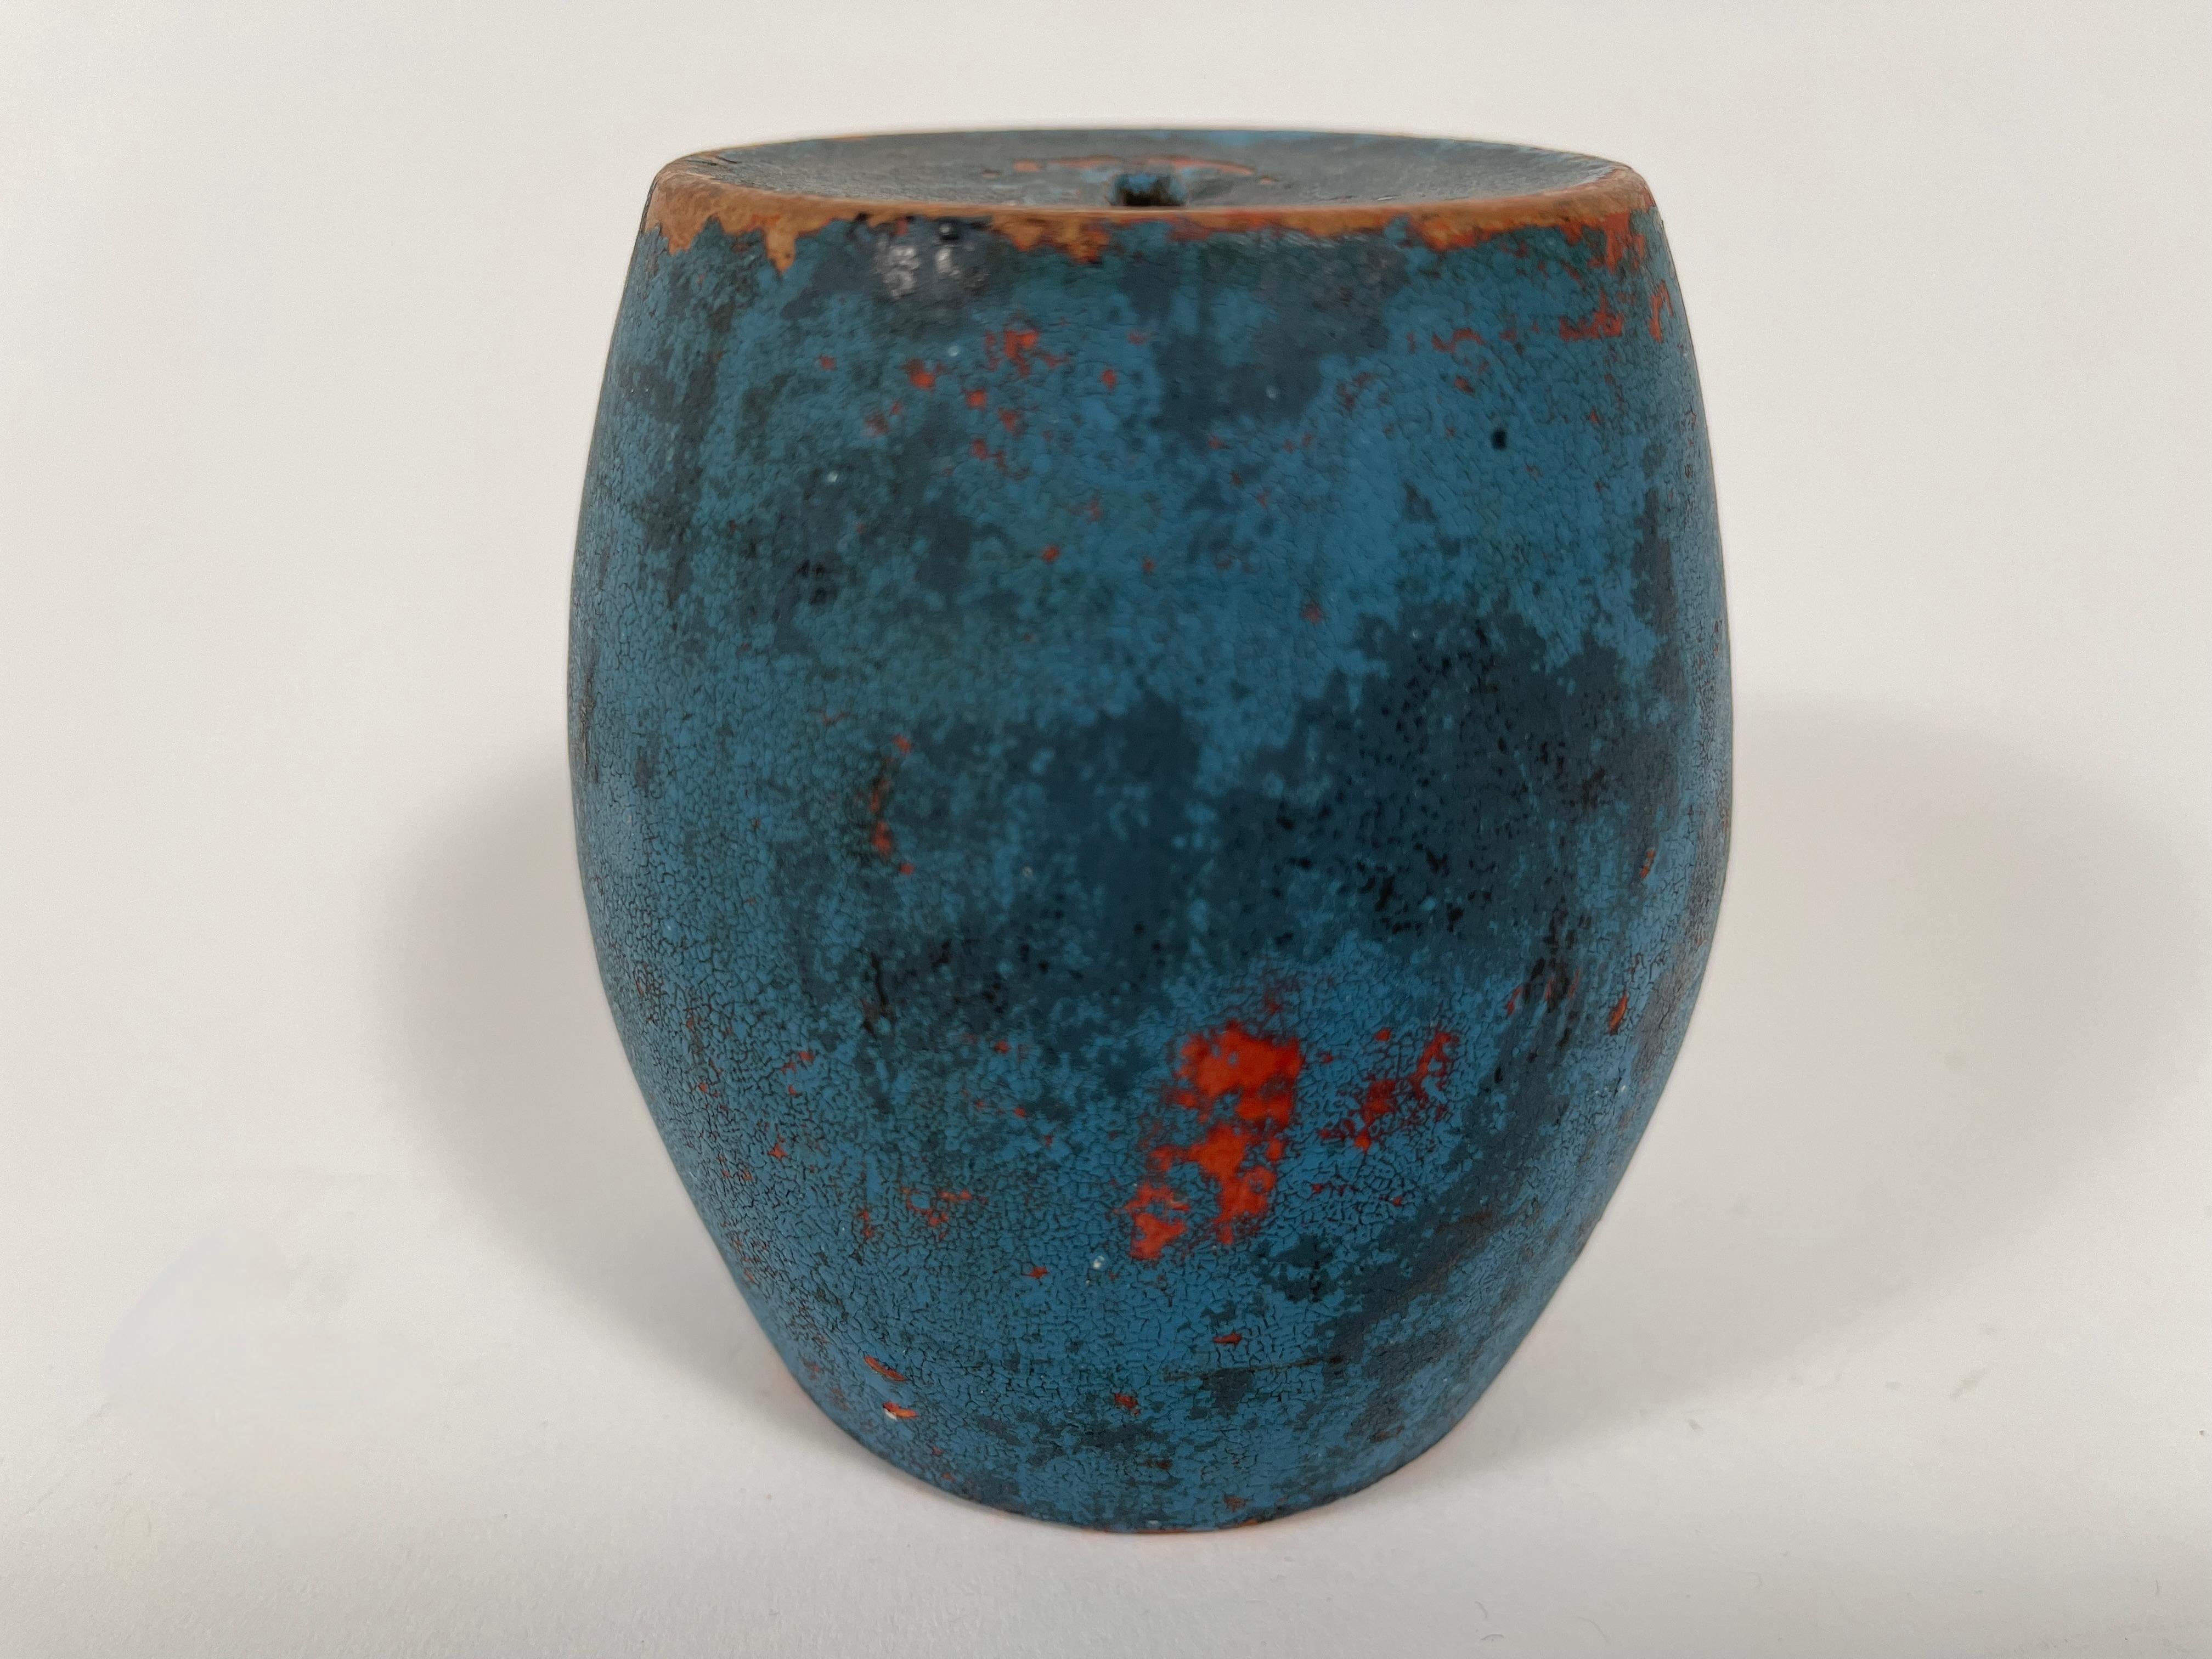 A 19th century American blue painted red ware pottery barrel-form bank. With its beautiful color, patina and form, this ceramic coin bank is a beautiful decorative object which reads as both country and modern at once.